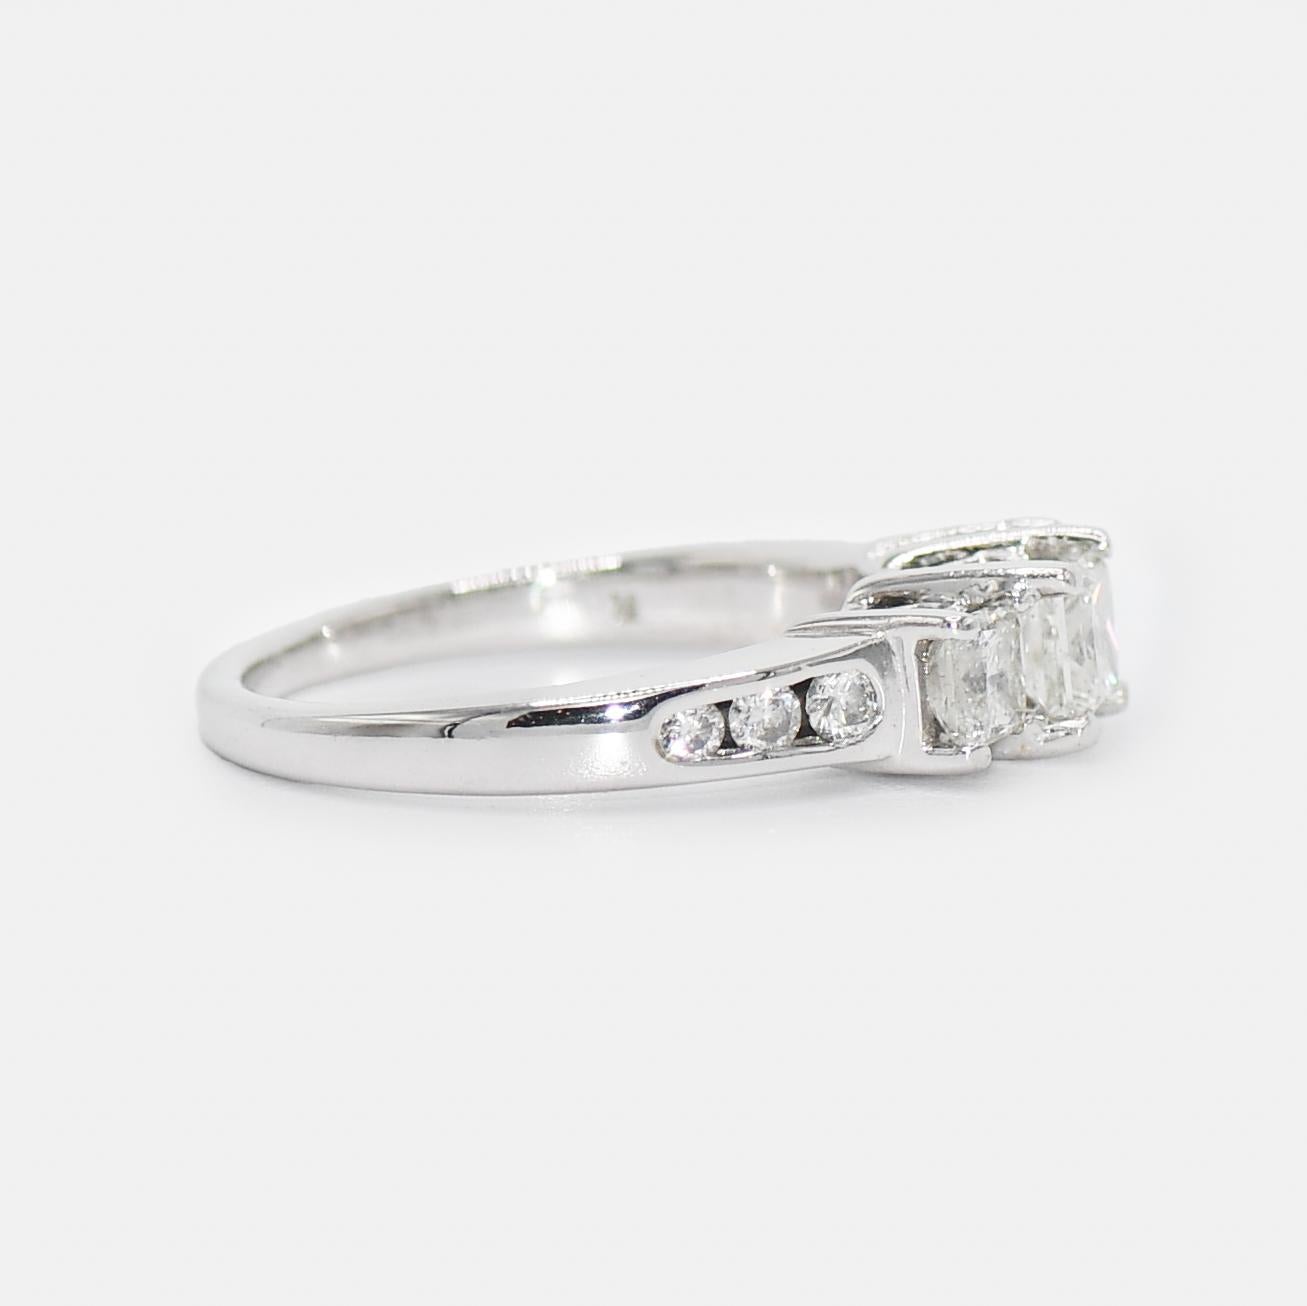 14K White Gold Diamond Engagement Ring 1.25TDW, 4.5g In Excellent Condition For Sale In Laguna Beach, CA